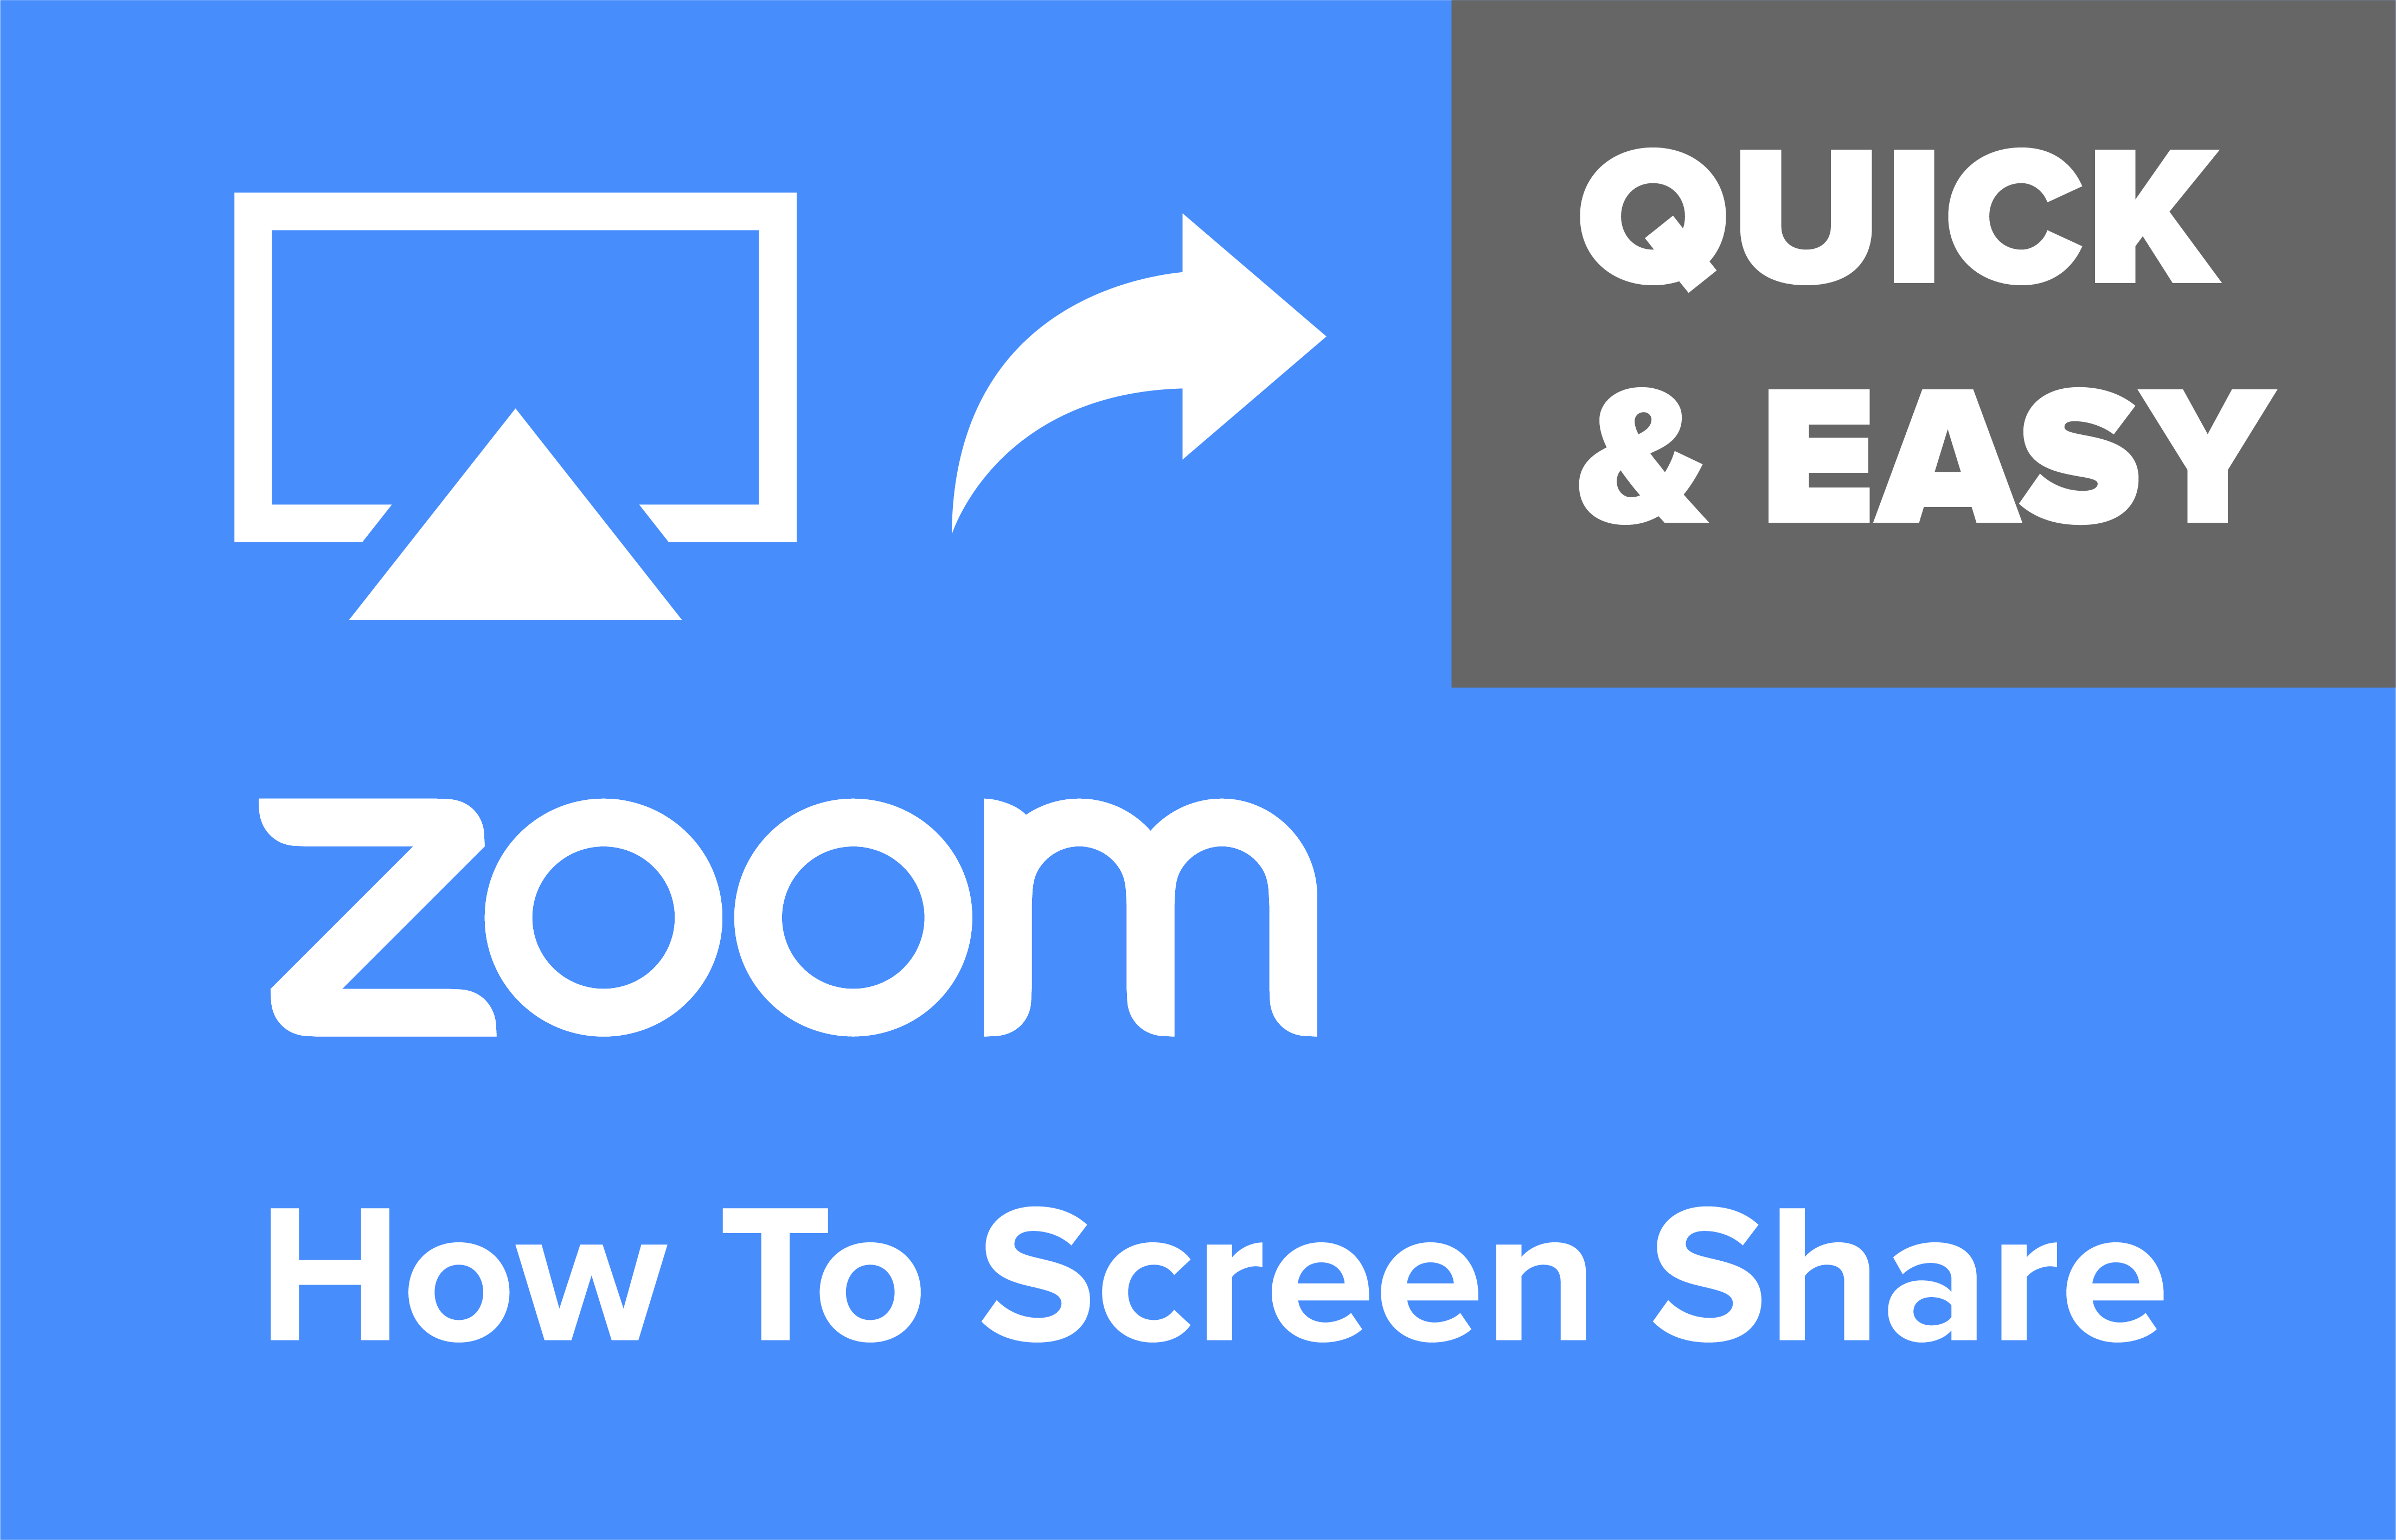 A-Zoom Logo - How To Screen Share In A Zoom Meeting - AVSPECT